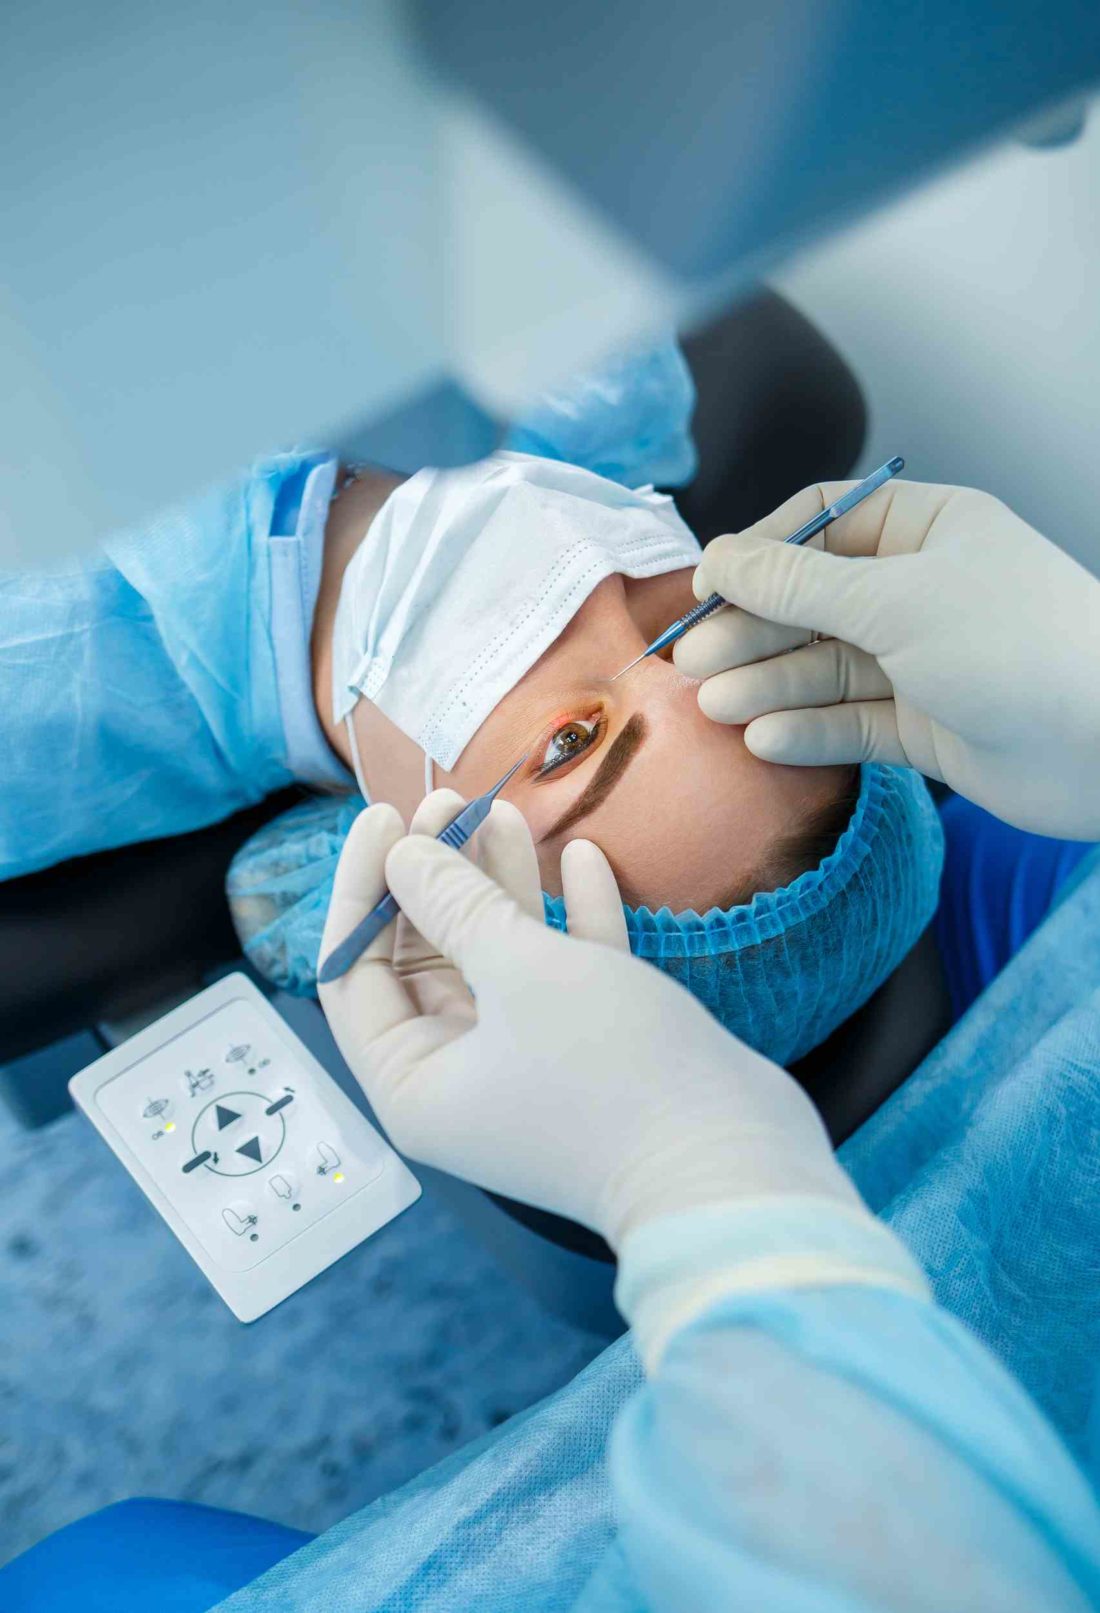 Lasik Surgery: Can It Improve Your Night Vision?